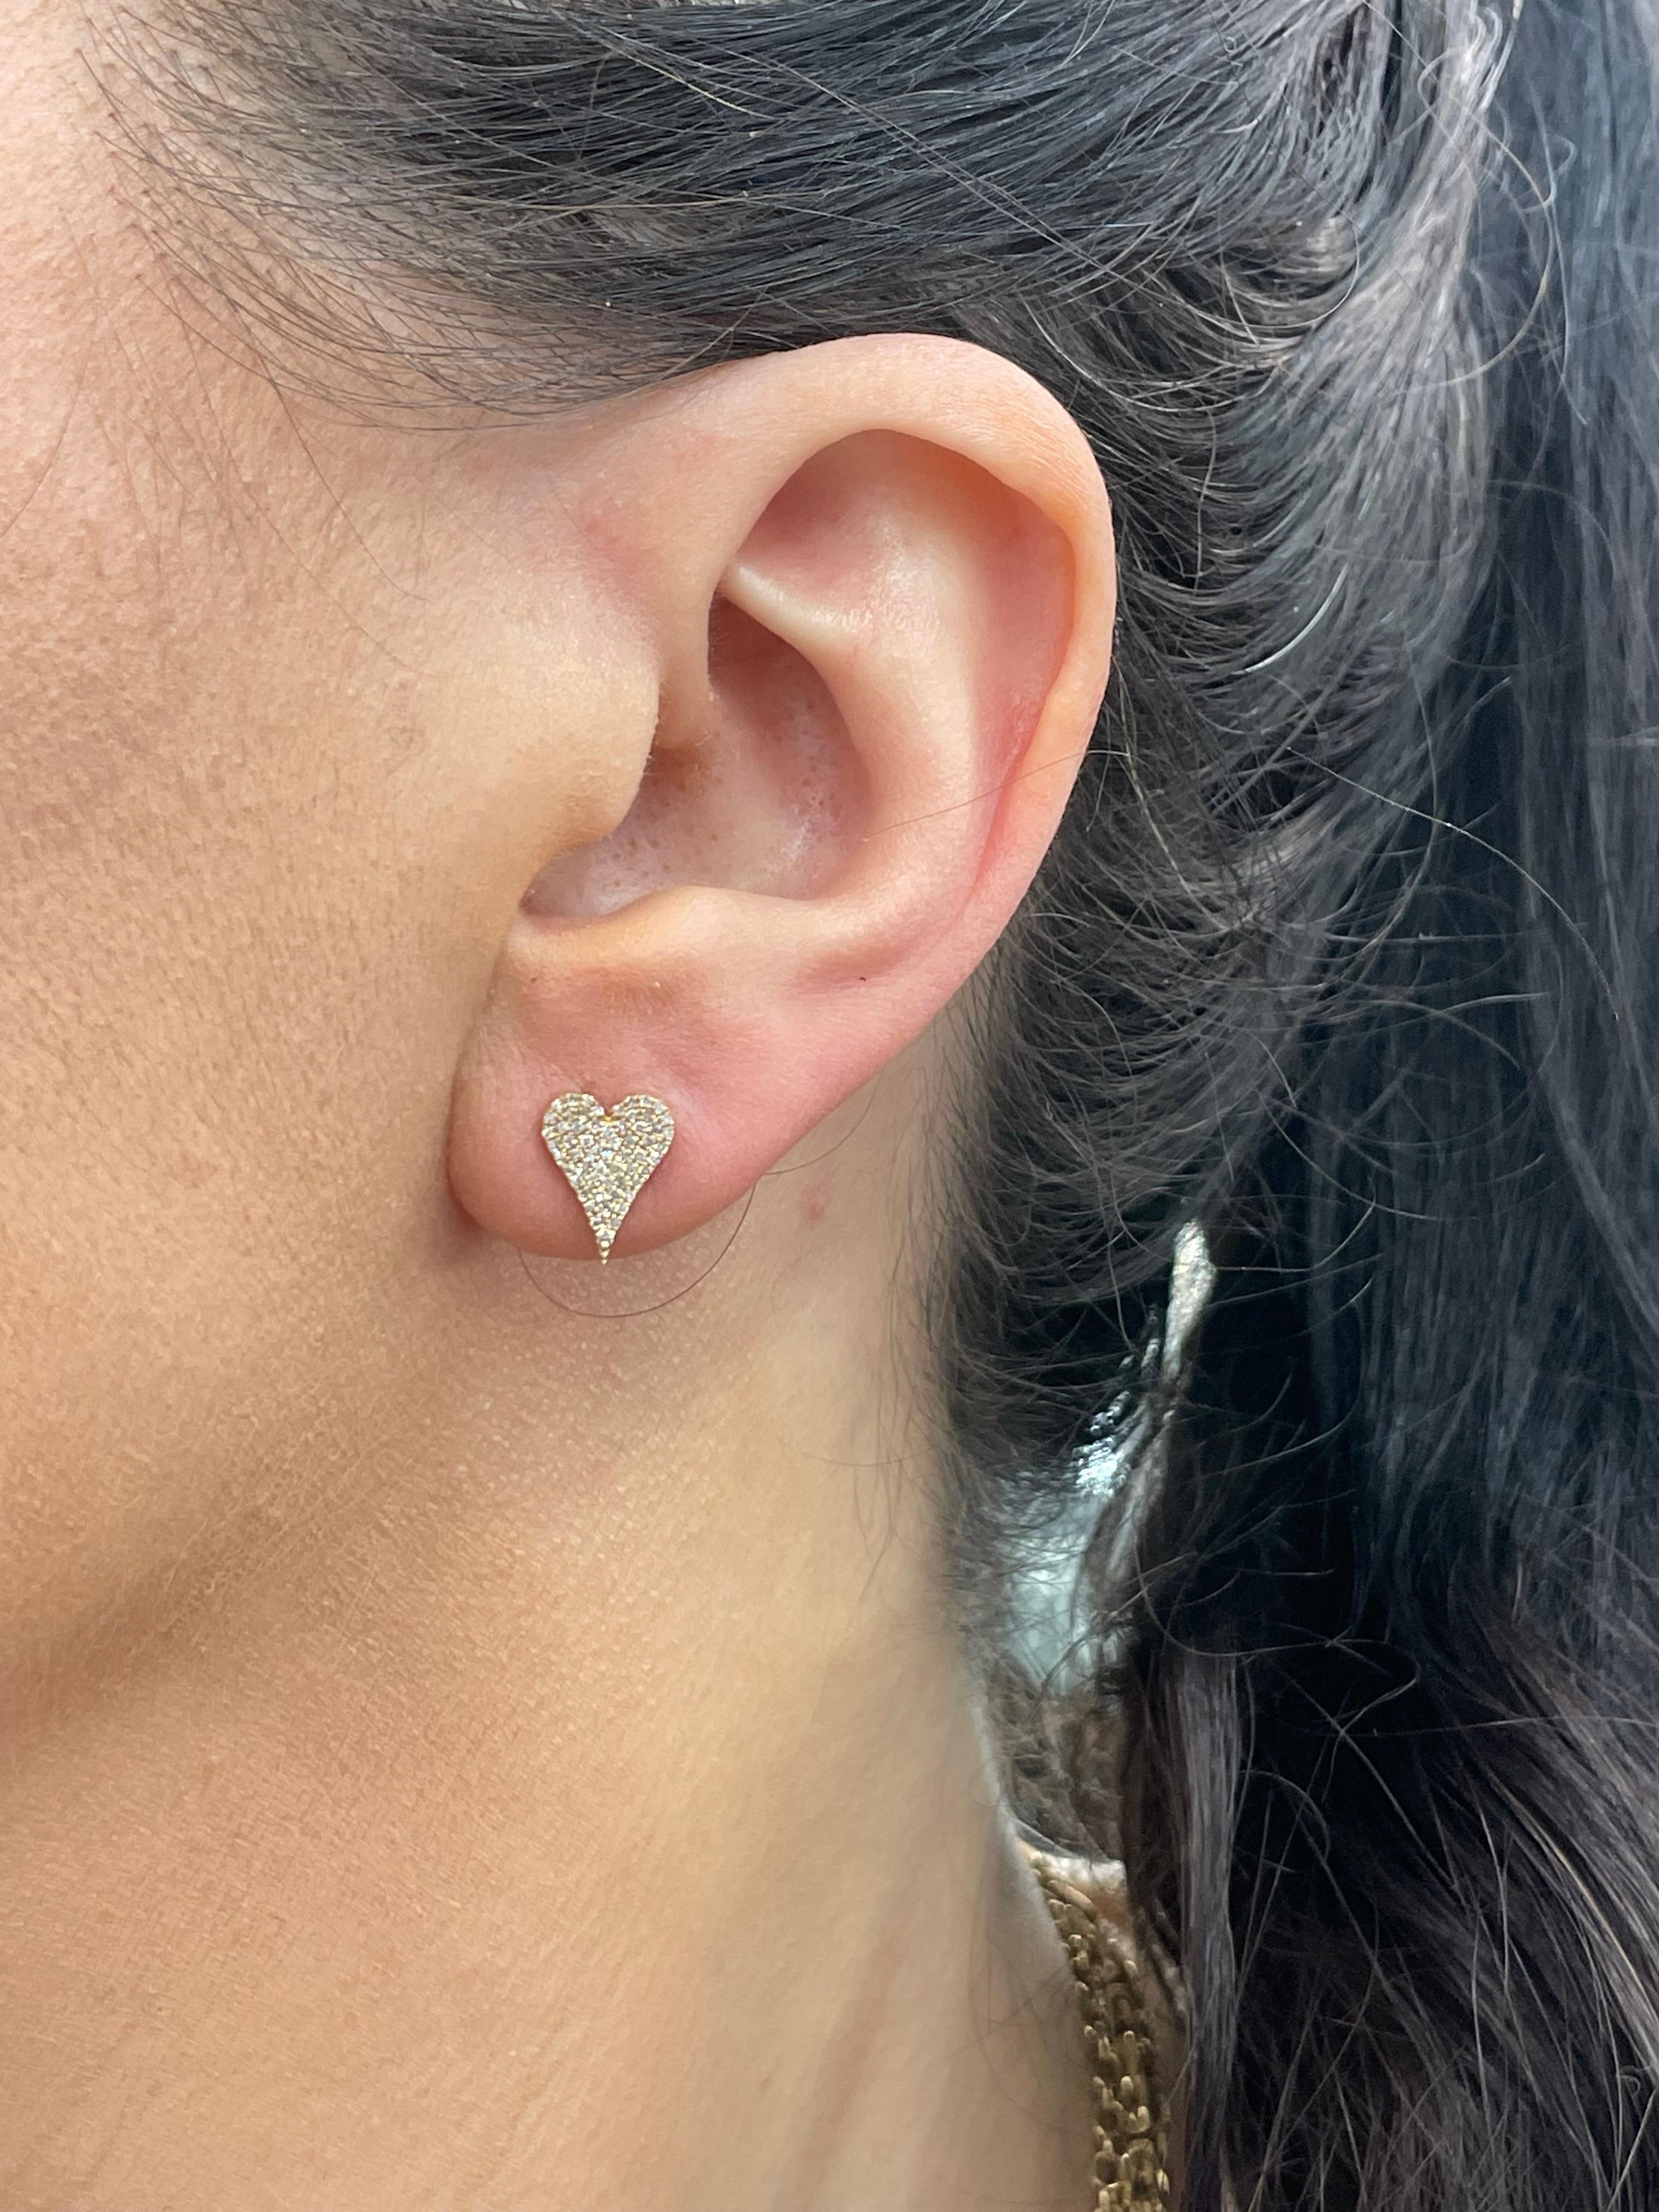 Diamond heart stud earrings containing 118 round brilliants weighing .026 Carats in 14 Karat Yellow Gold. 
Available in a smaller size in white gold

DM for more pictures & videos.
Search Harbor Diamonds. 